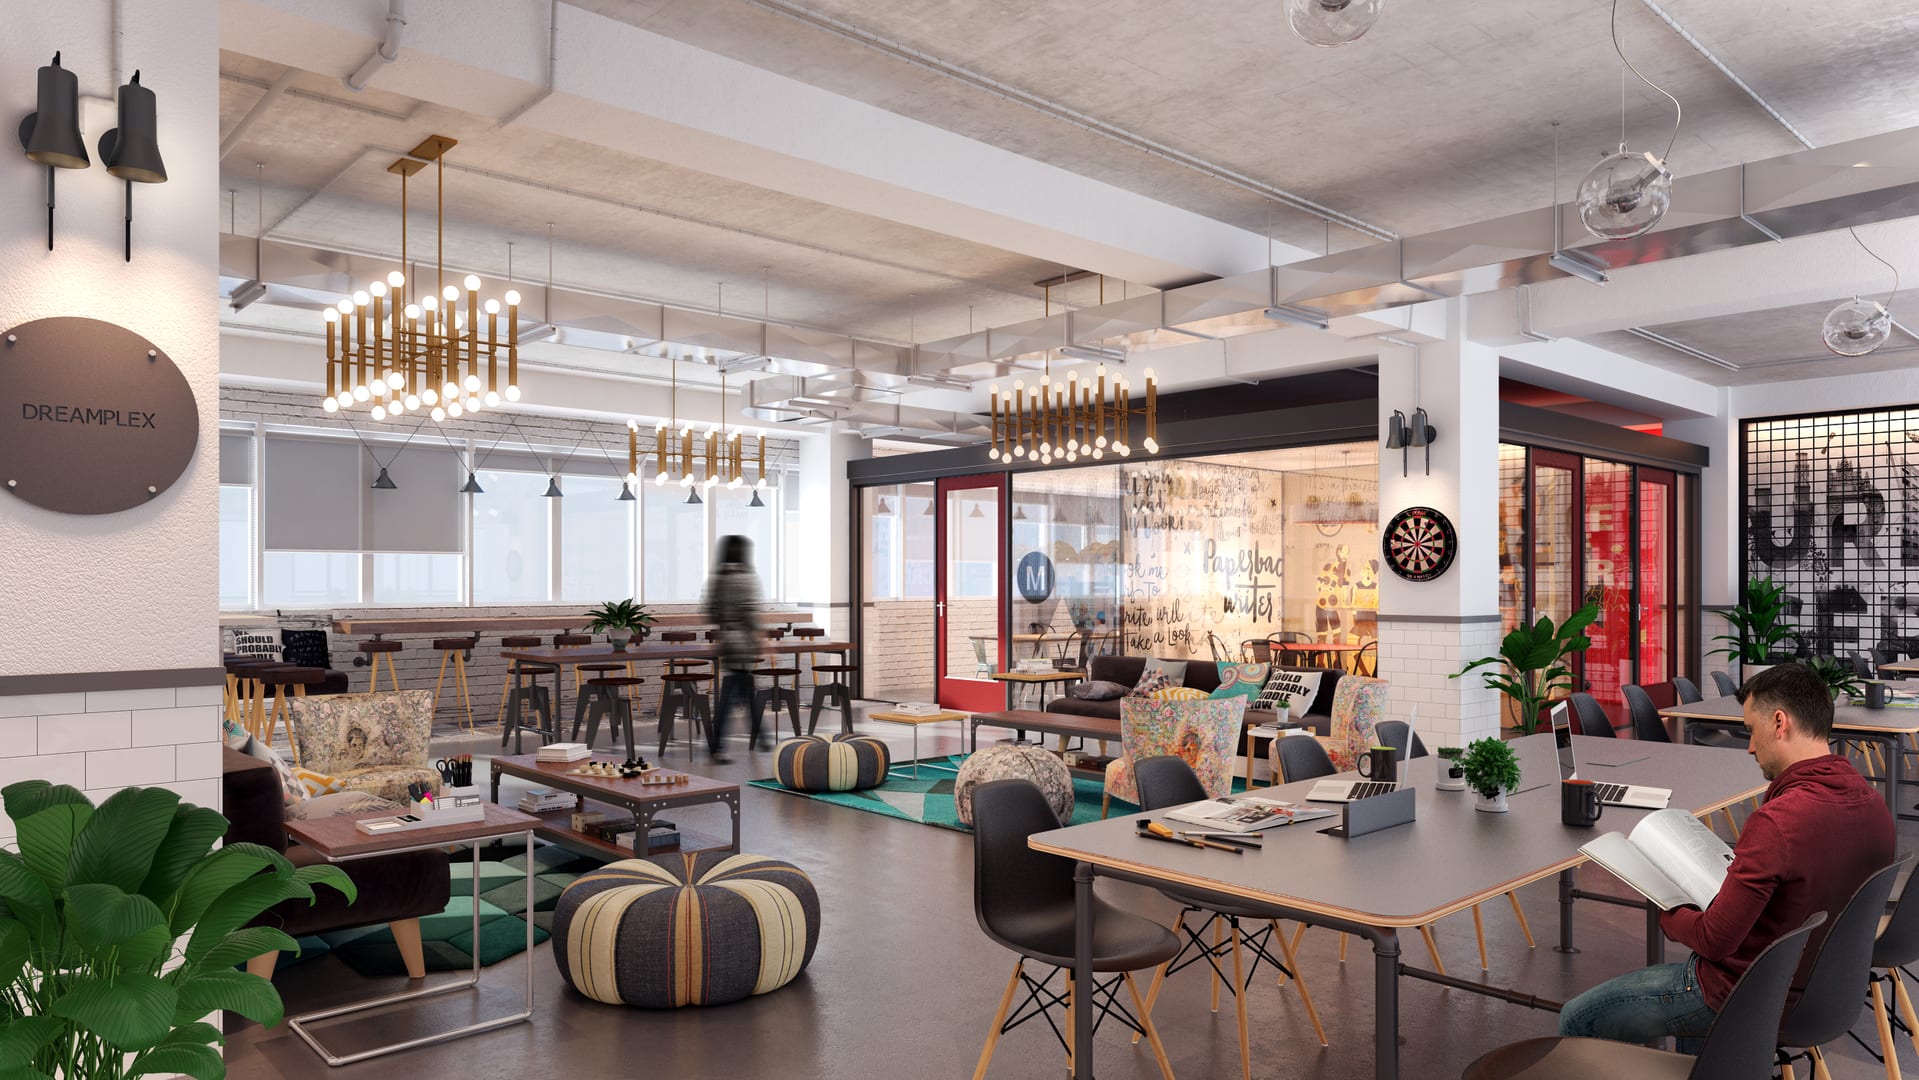 Where startups lead, corporates follow – why co-working is the future